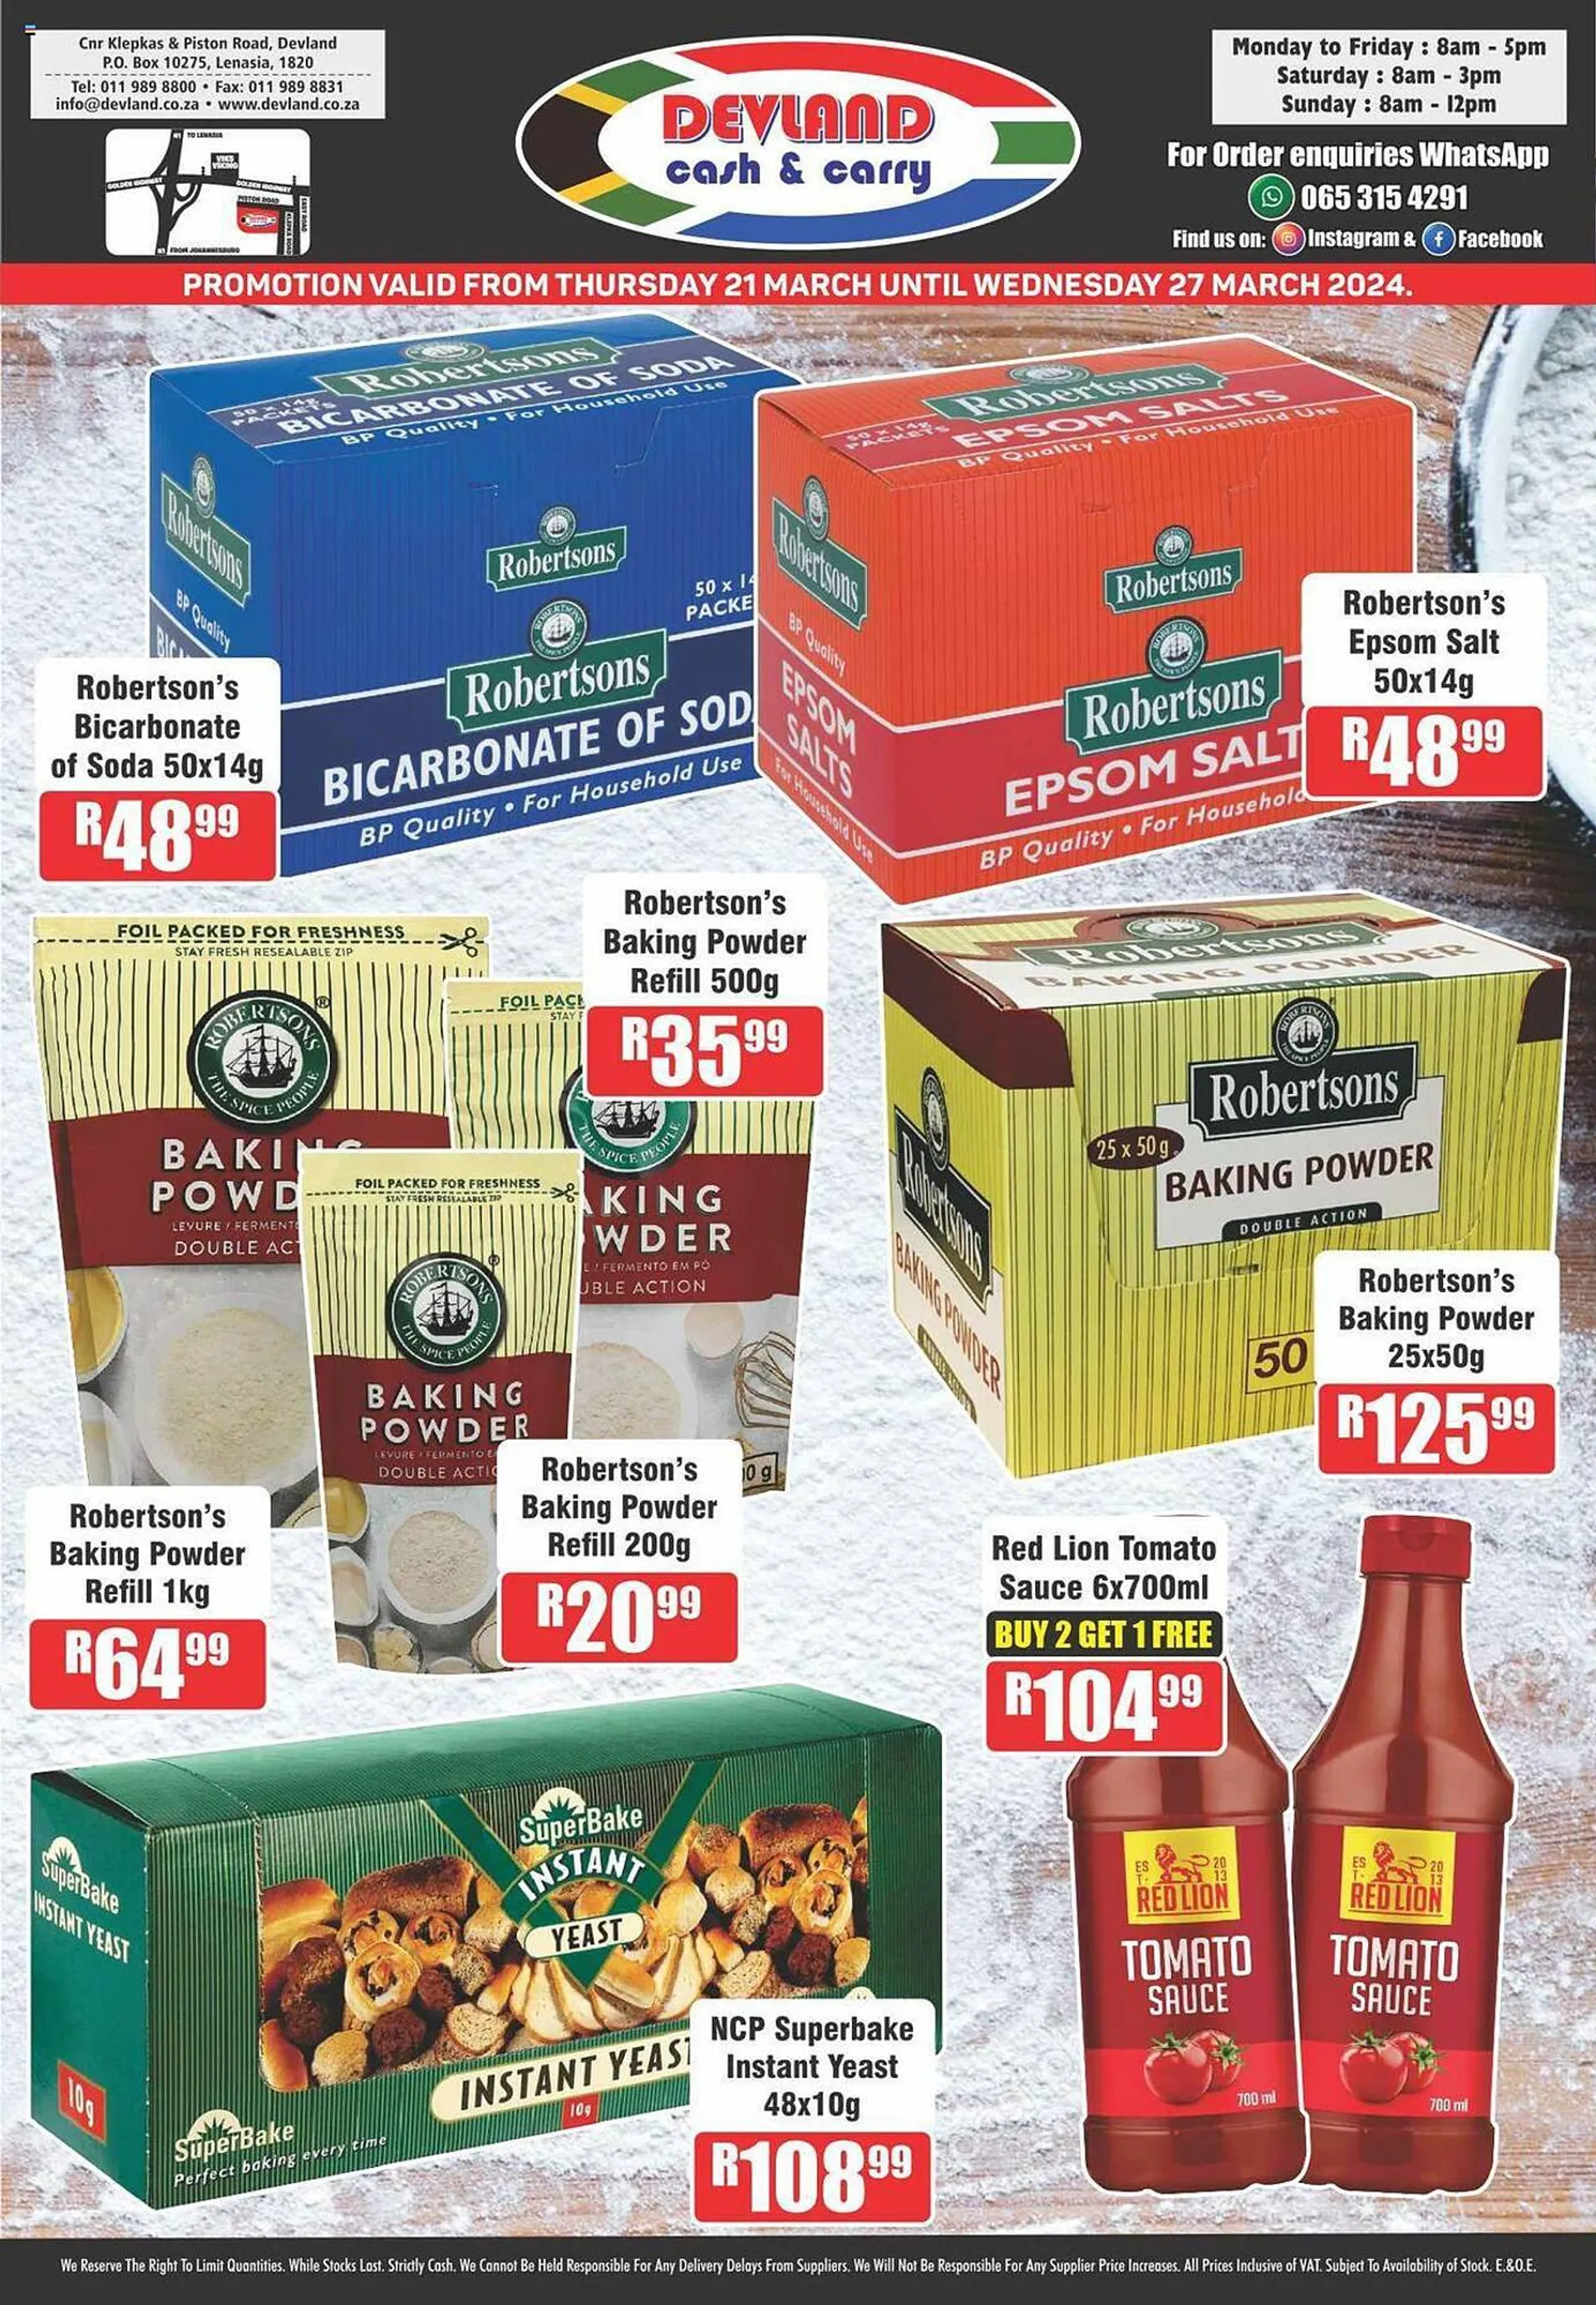 Devland Cash And Carry catalogue - 21 March 27 March 2024 - Page 1